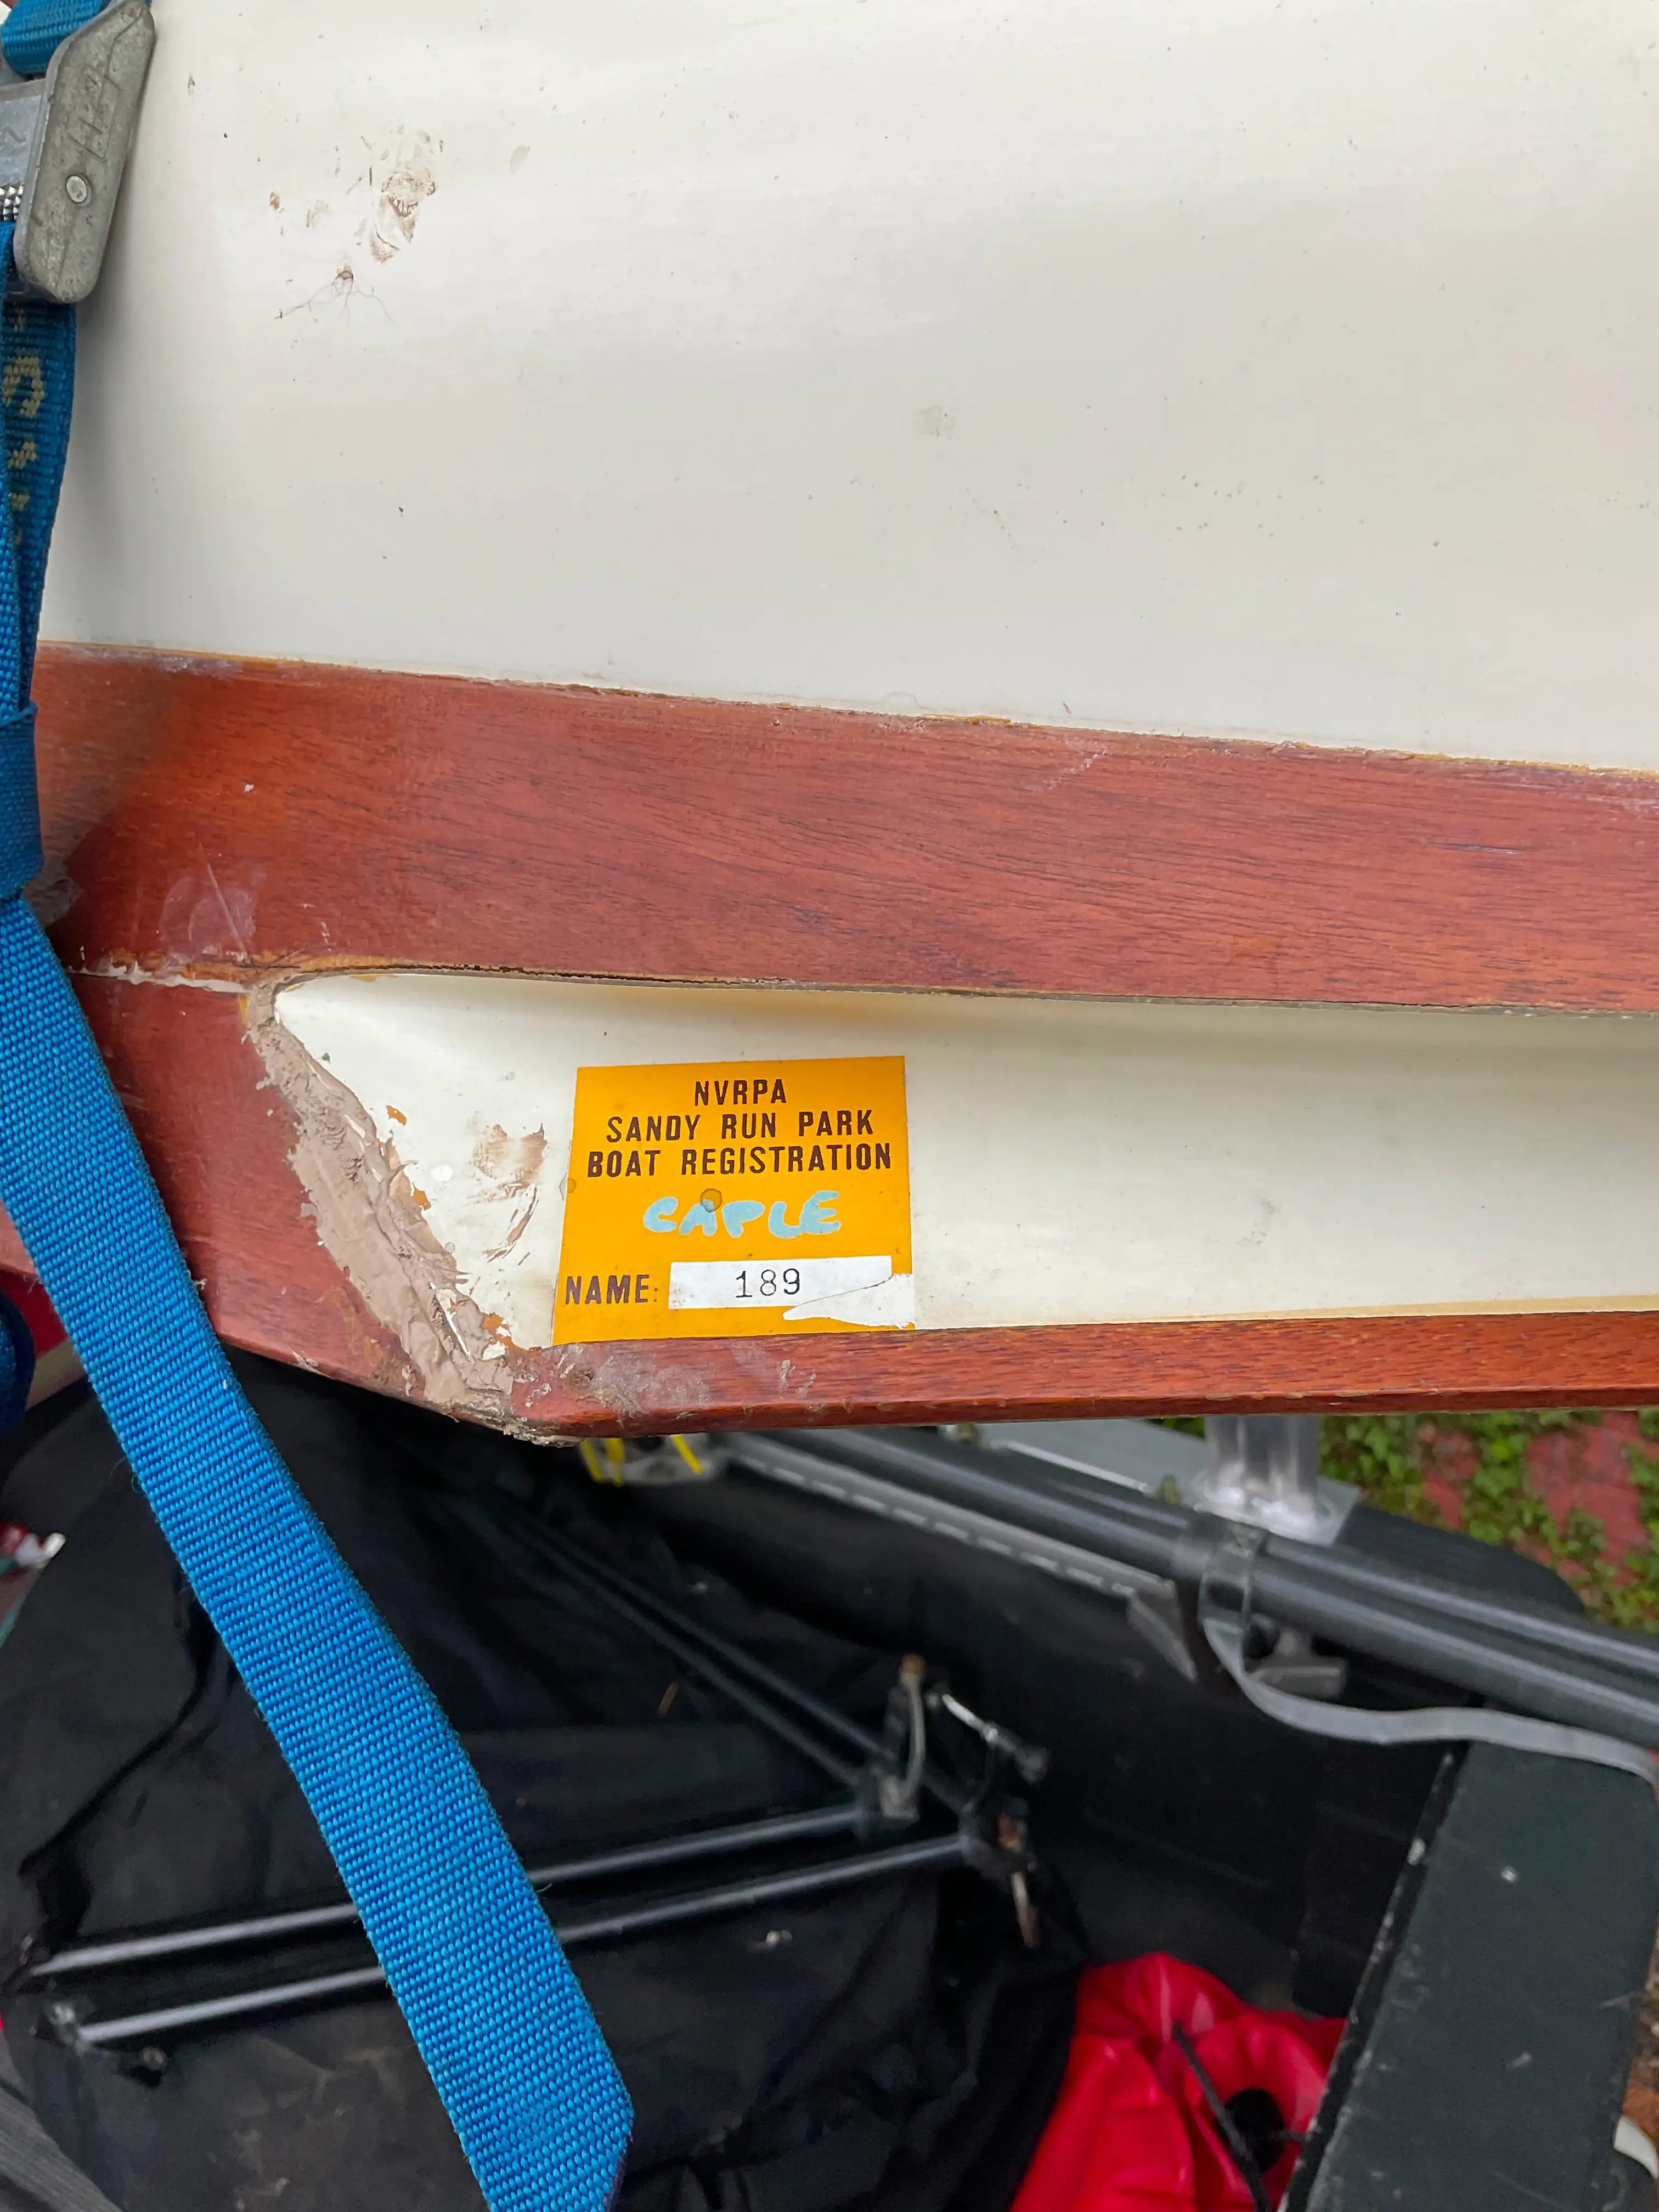 Proof Tom Fannon's boat was purchased from me.  It still has the Sandy Run Park sticker on it with my name.